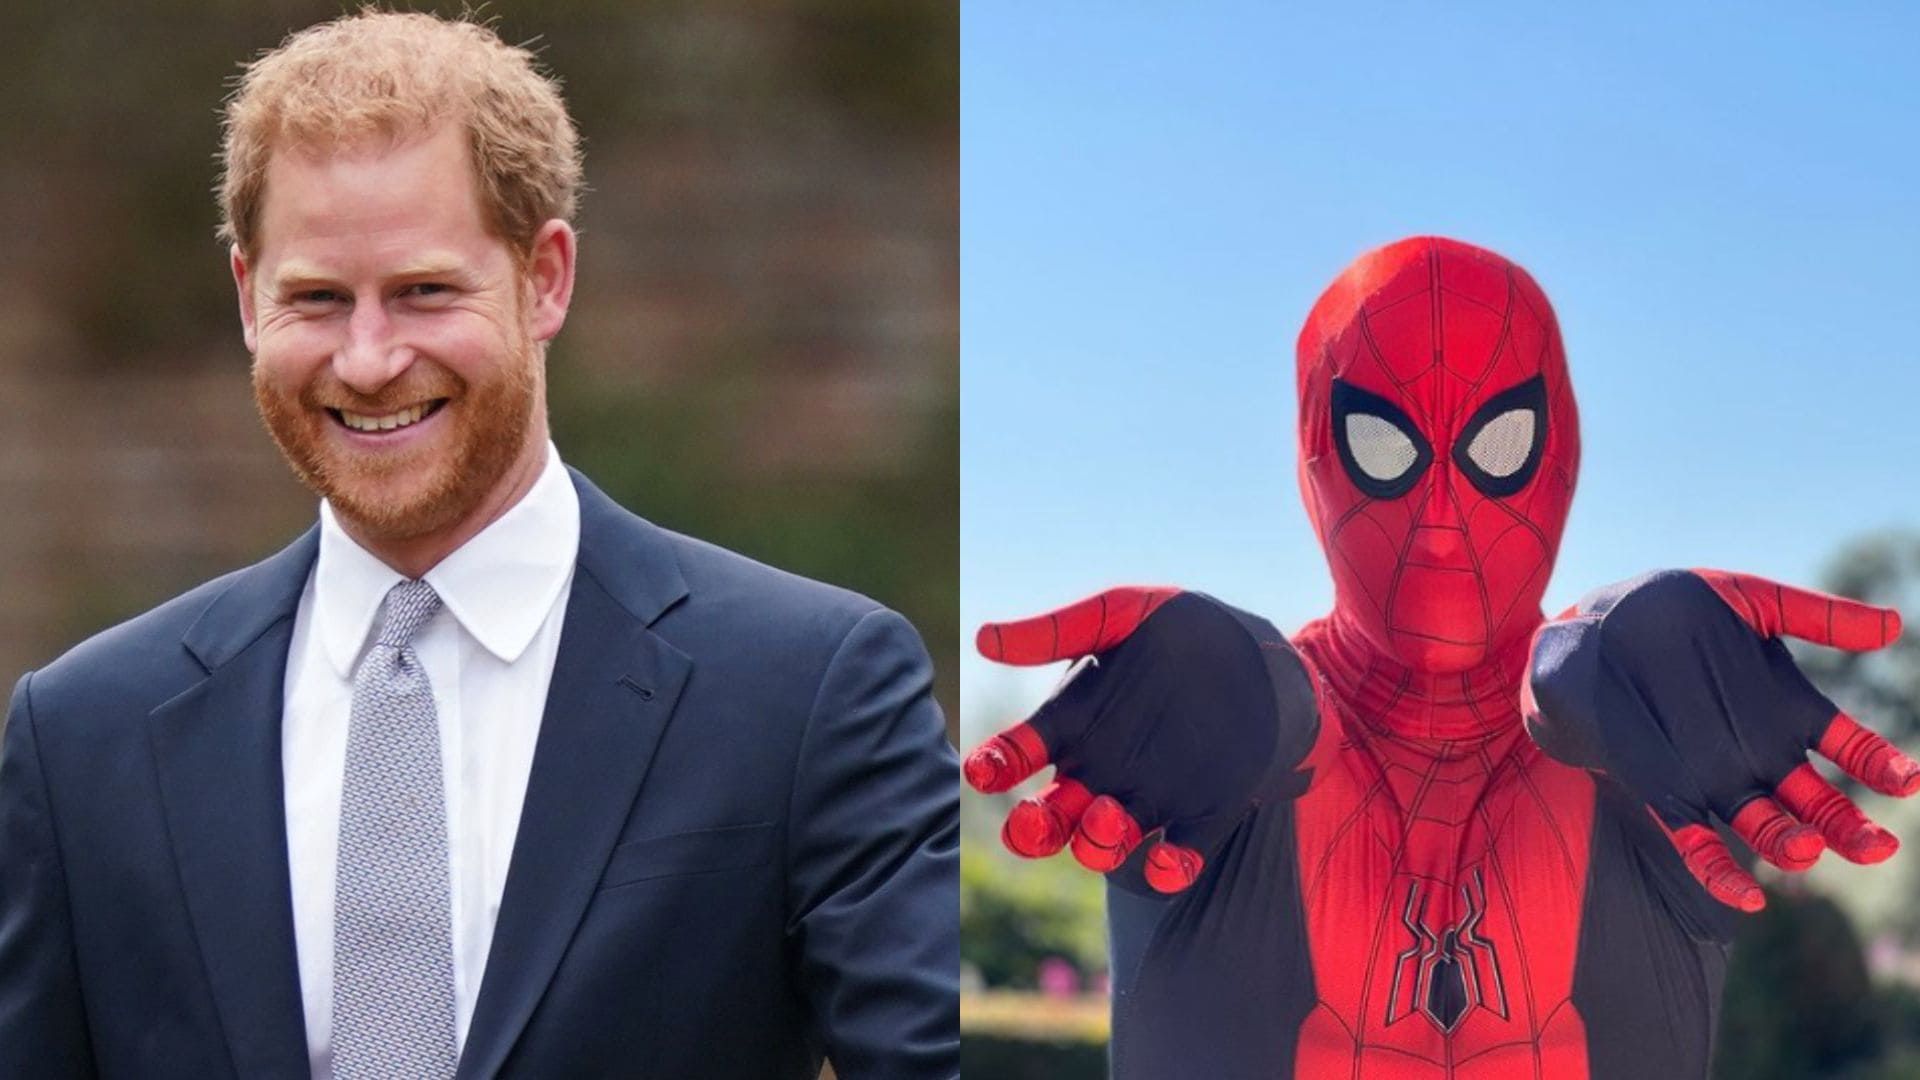 Prince Harry transforms into Spiderman to celebrate Christmas with military children who have lost their parents

+2023